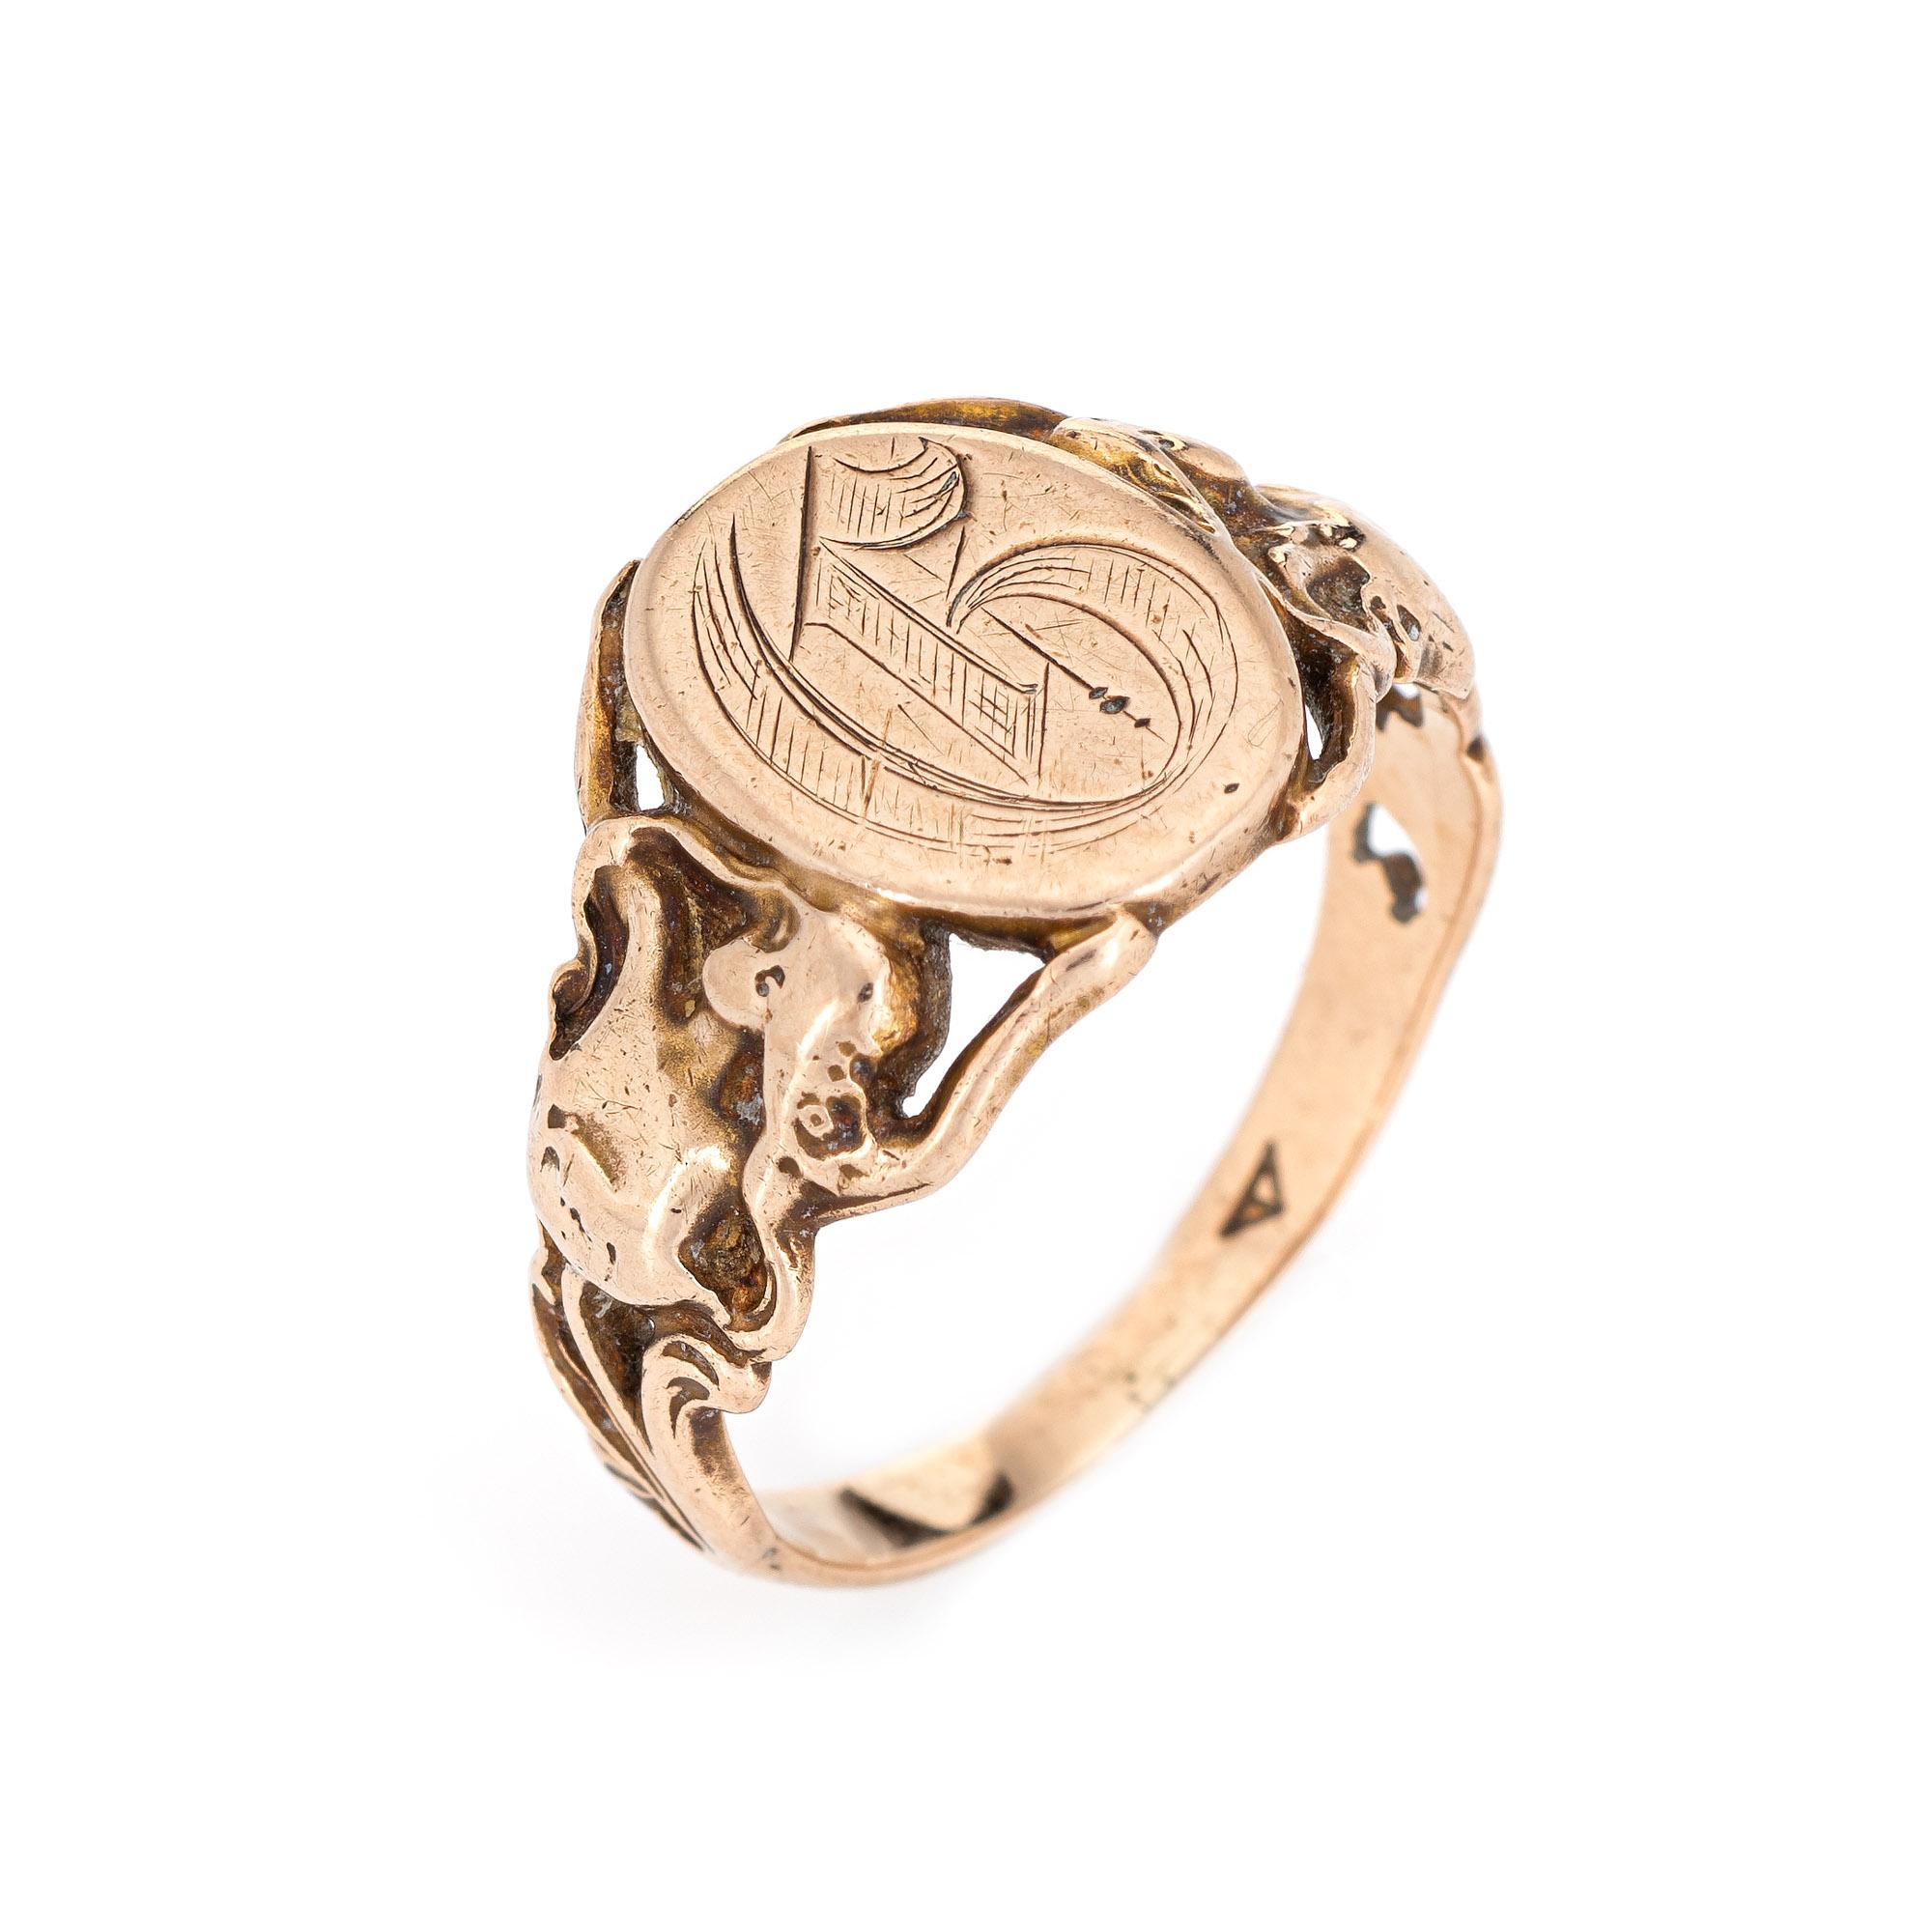 Lovely antique Art Nouveau signet ring (circa 1900s to 1910s), crafted in 14 karat yellow gold. 

The center oval is engraved with the letter 'D' 

The side shoulders feature a nude goddess figure, a popular motif during Art Nouveau era. The saddle